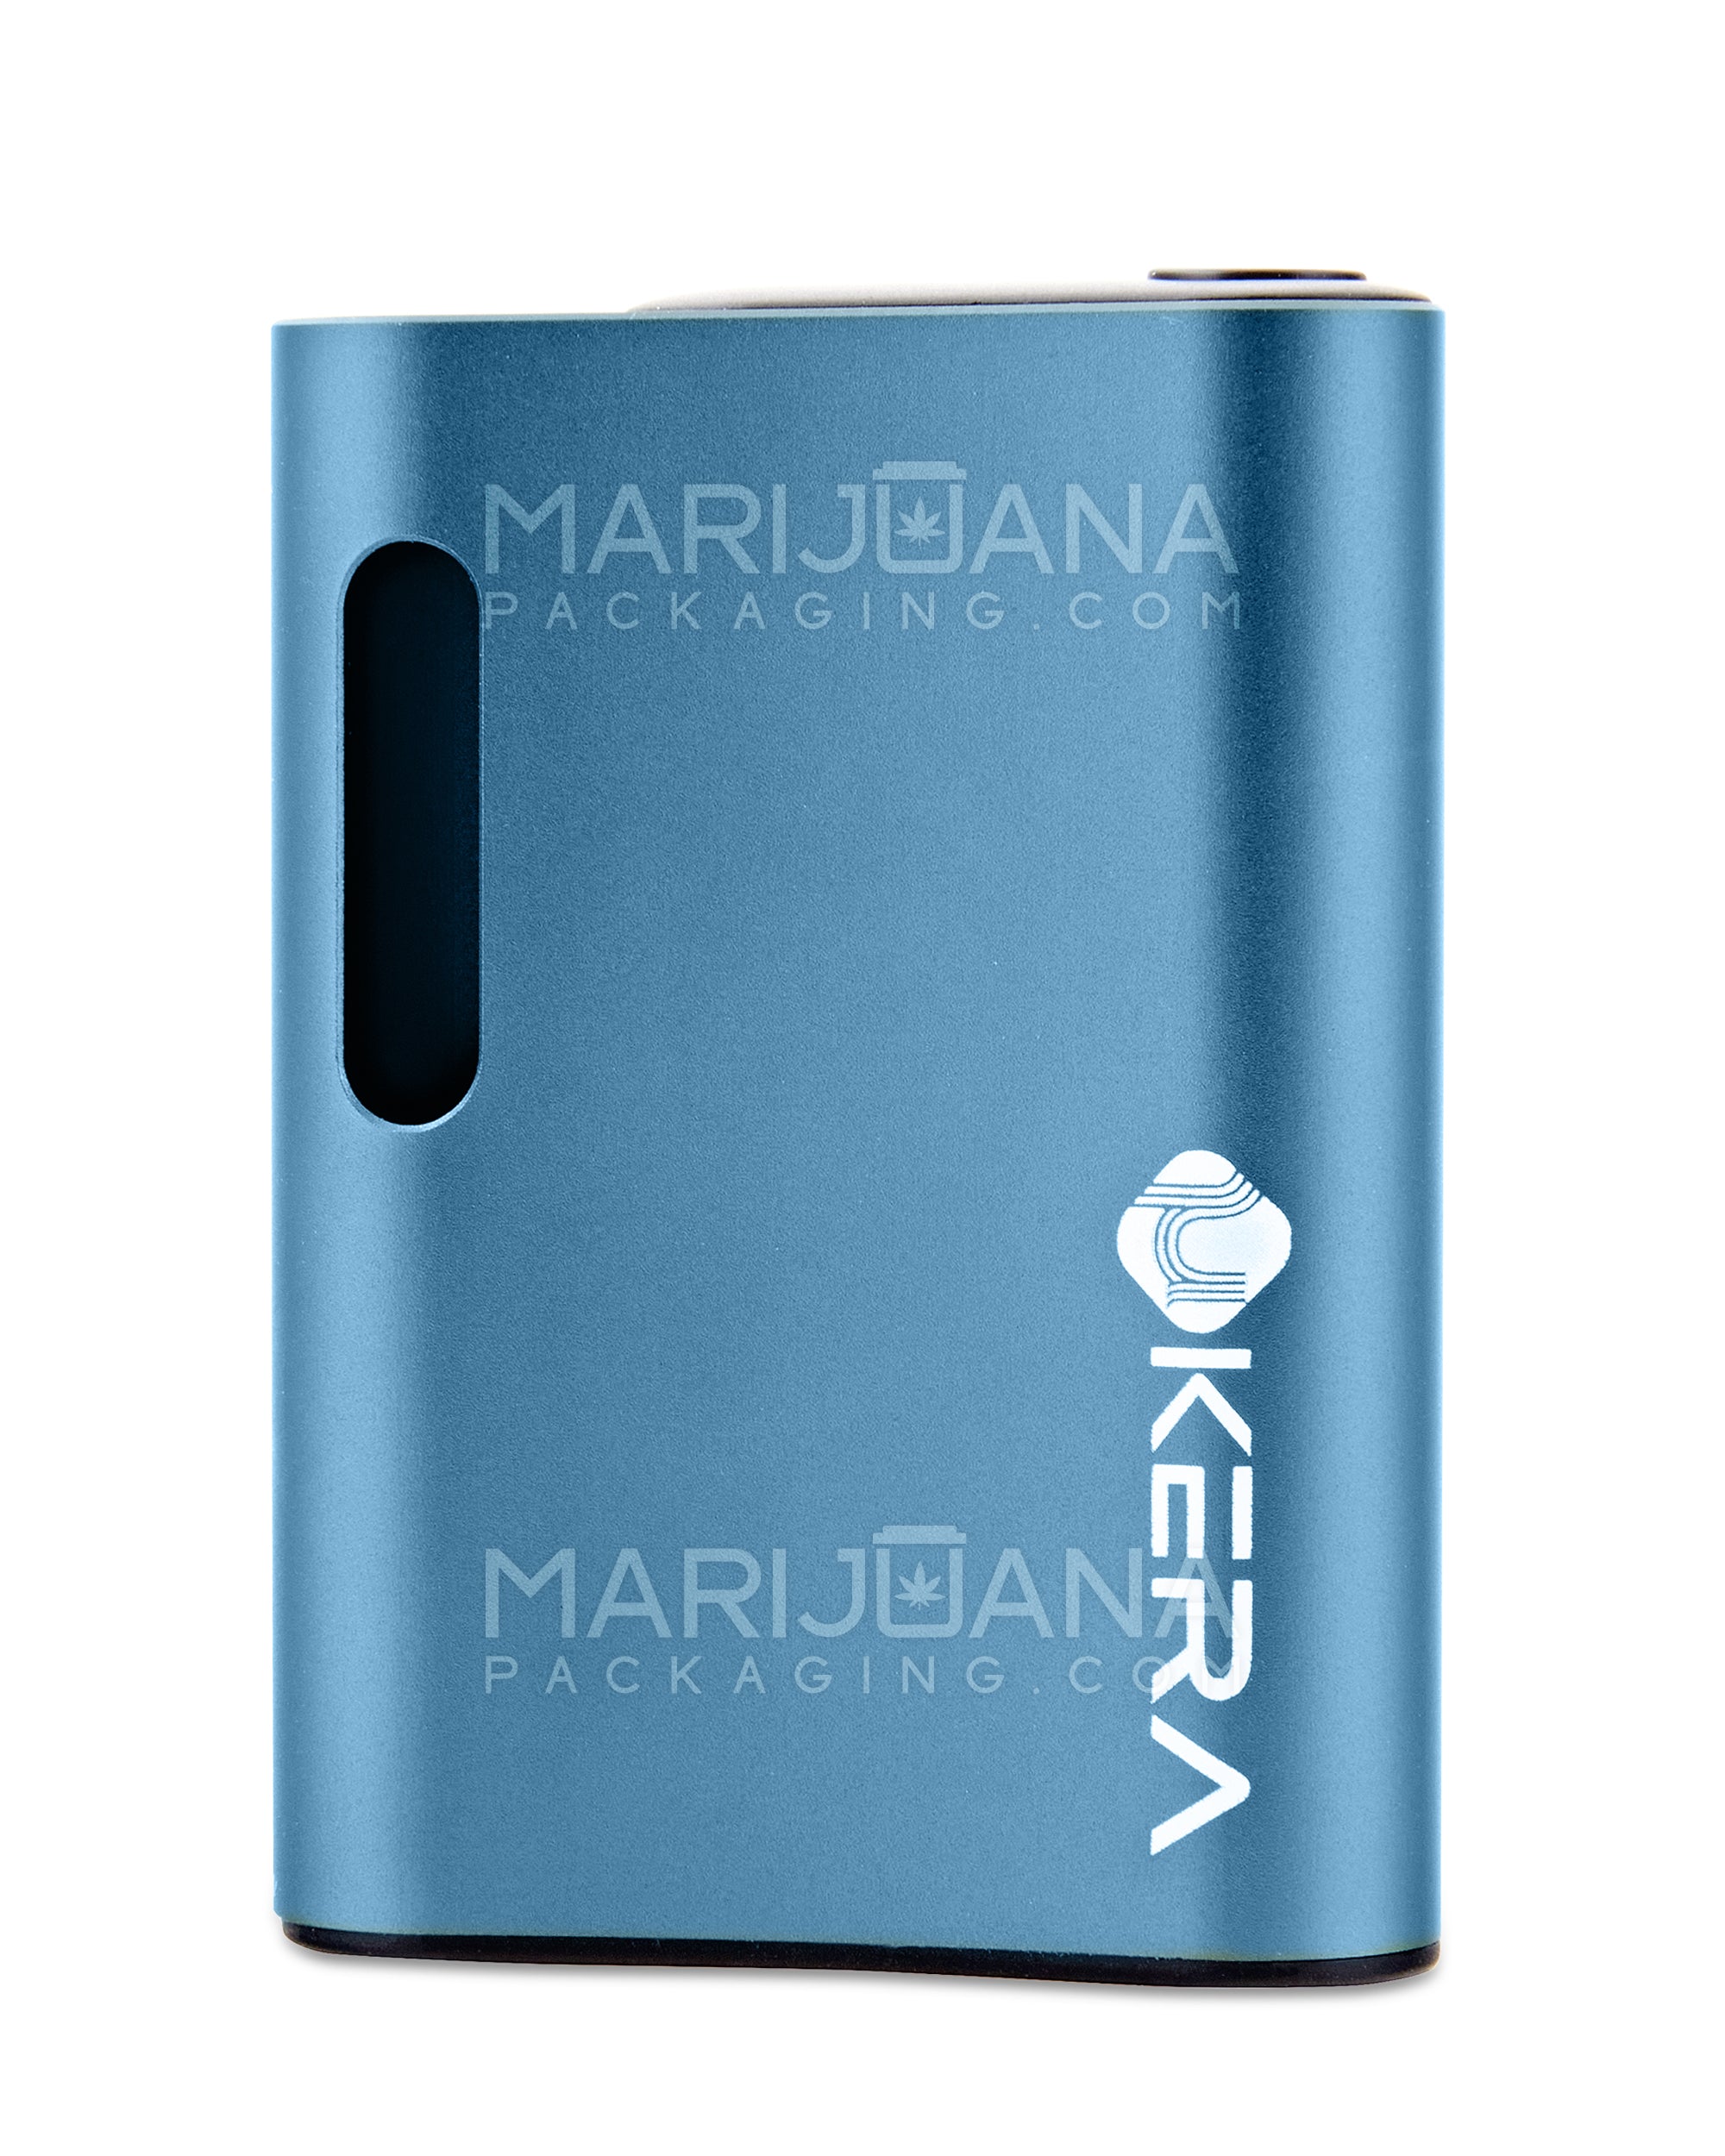 Vault SE 510 Thread Vape Battery with USB Charger | 500mAh - Sky Blue - 1 Count